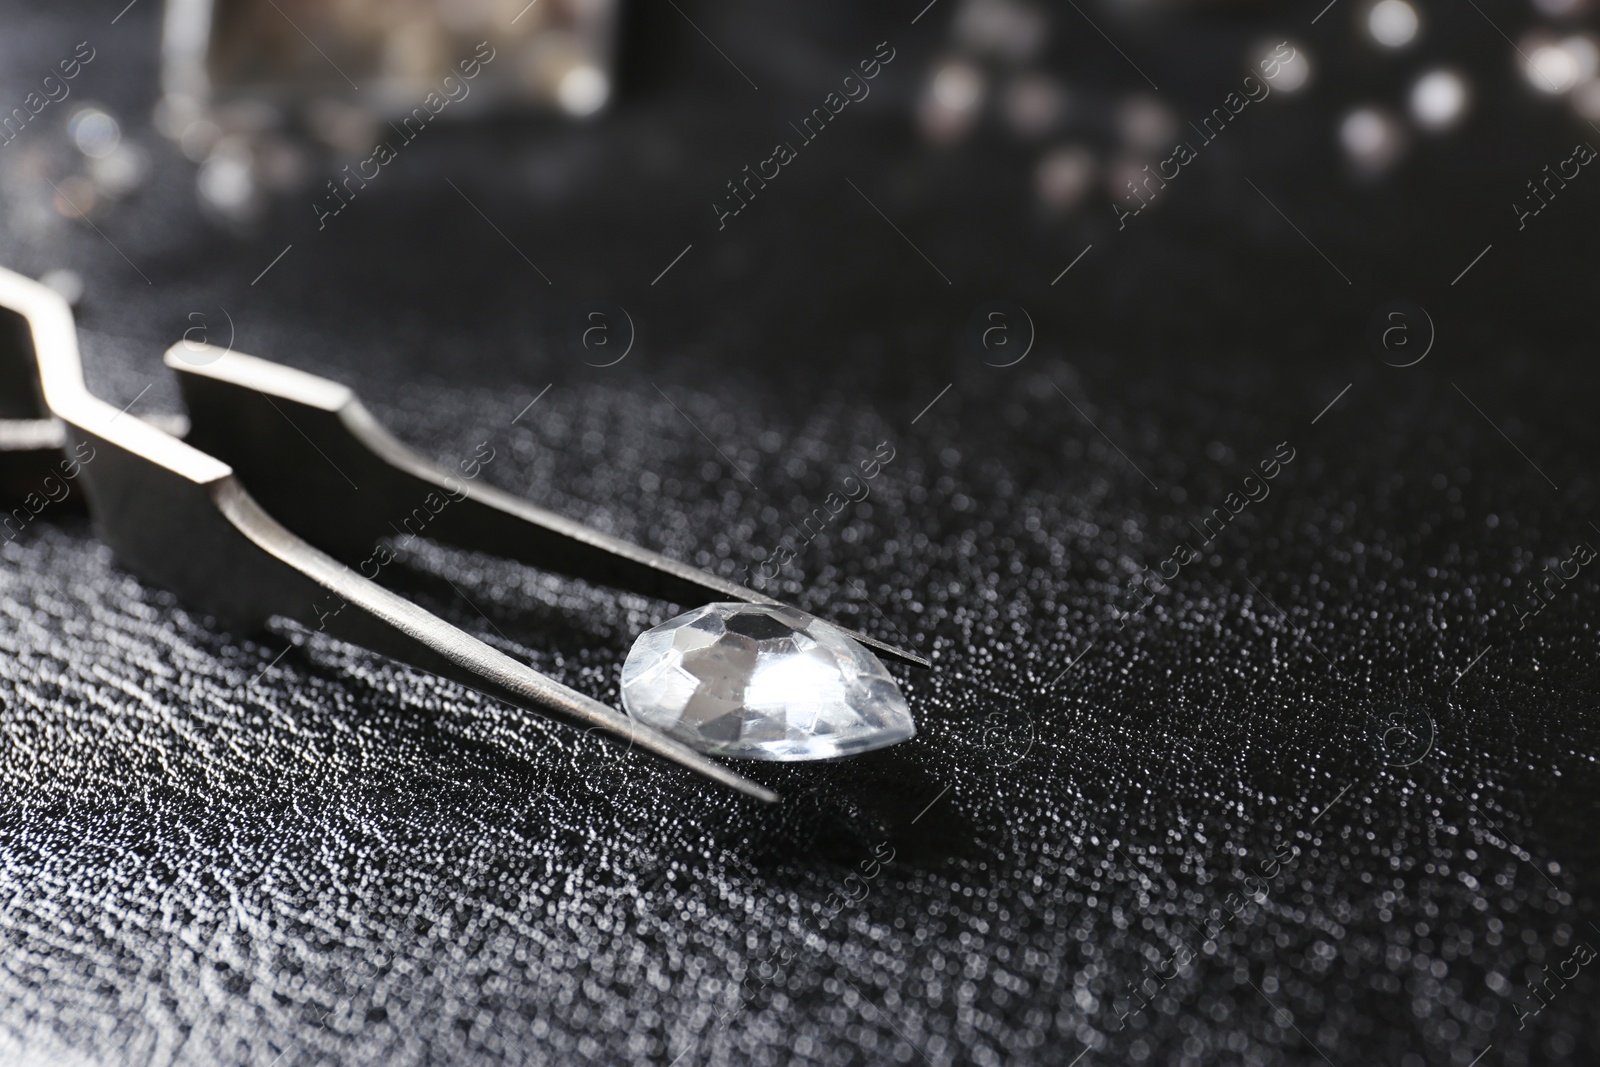 Photo of Jewel and tweezers on black leather surface